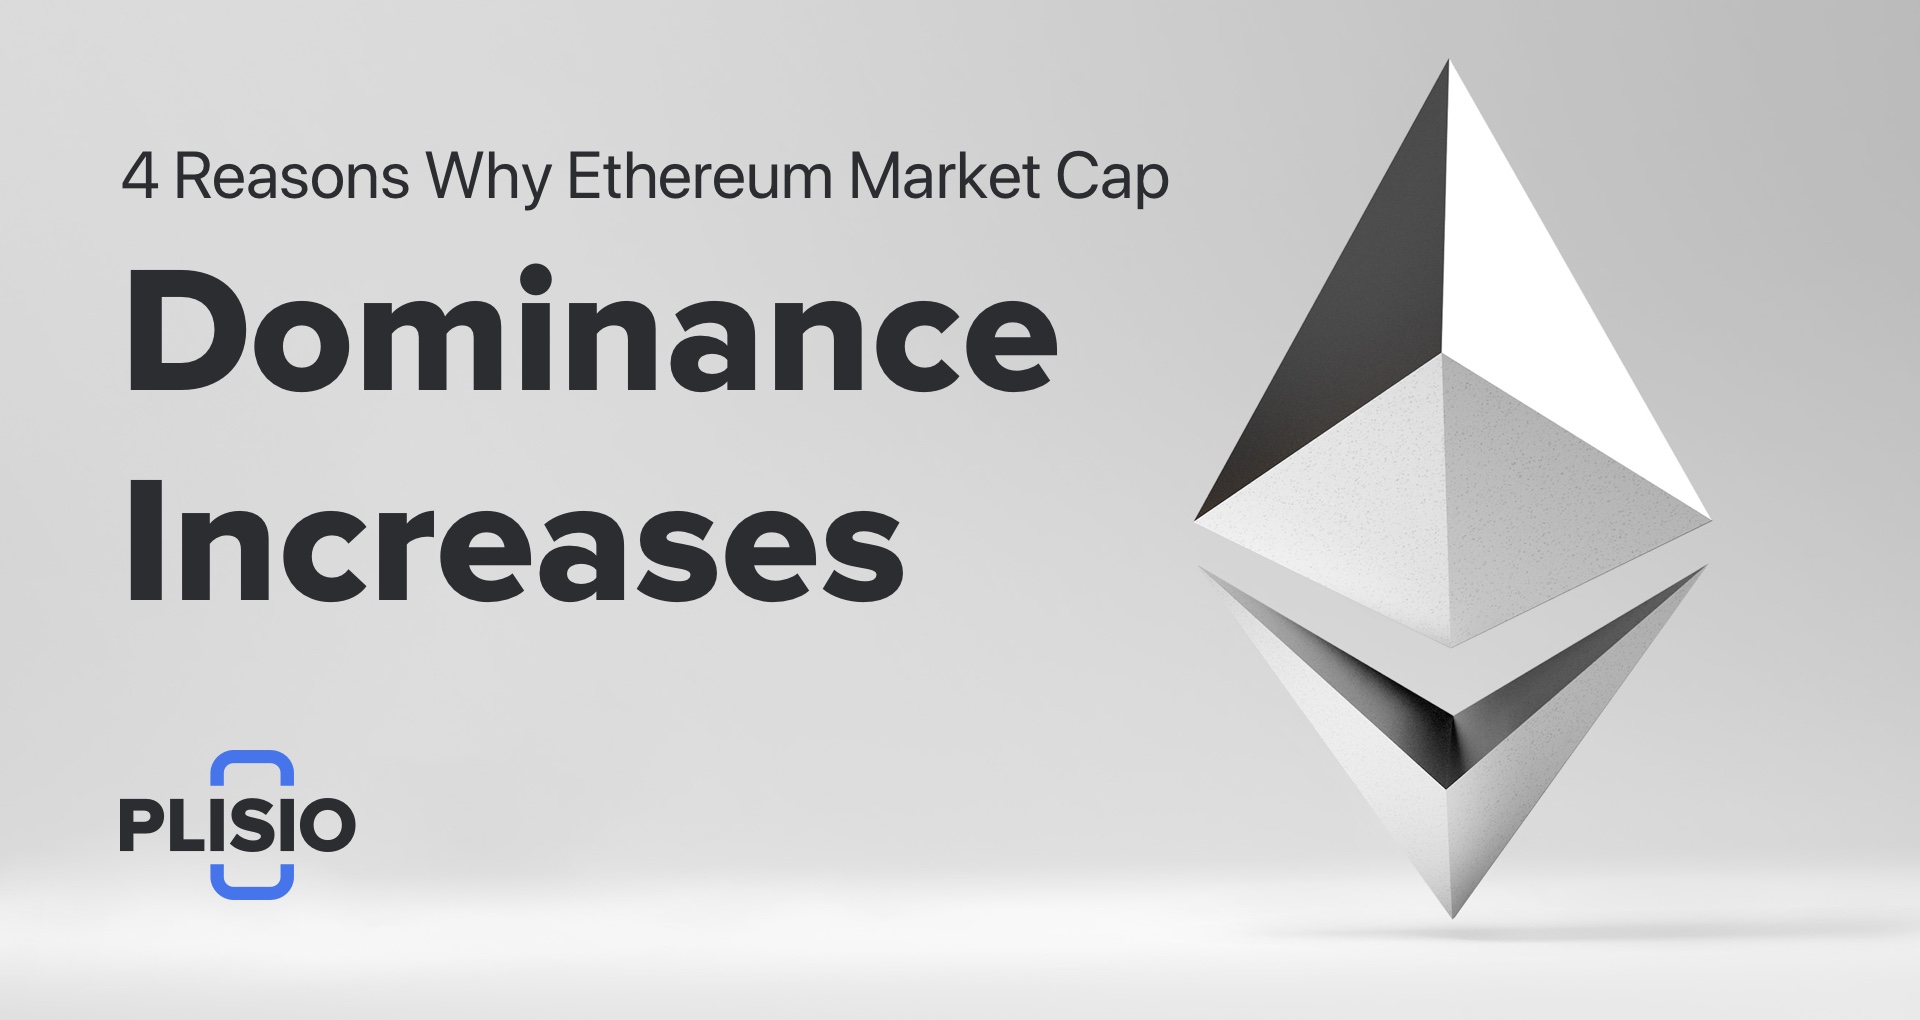 4 Reasons Why Ethereum Market Cap Dominance Increases